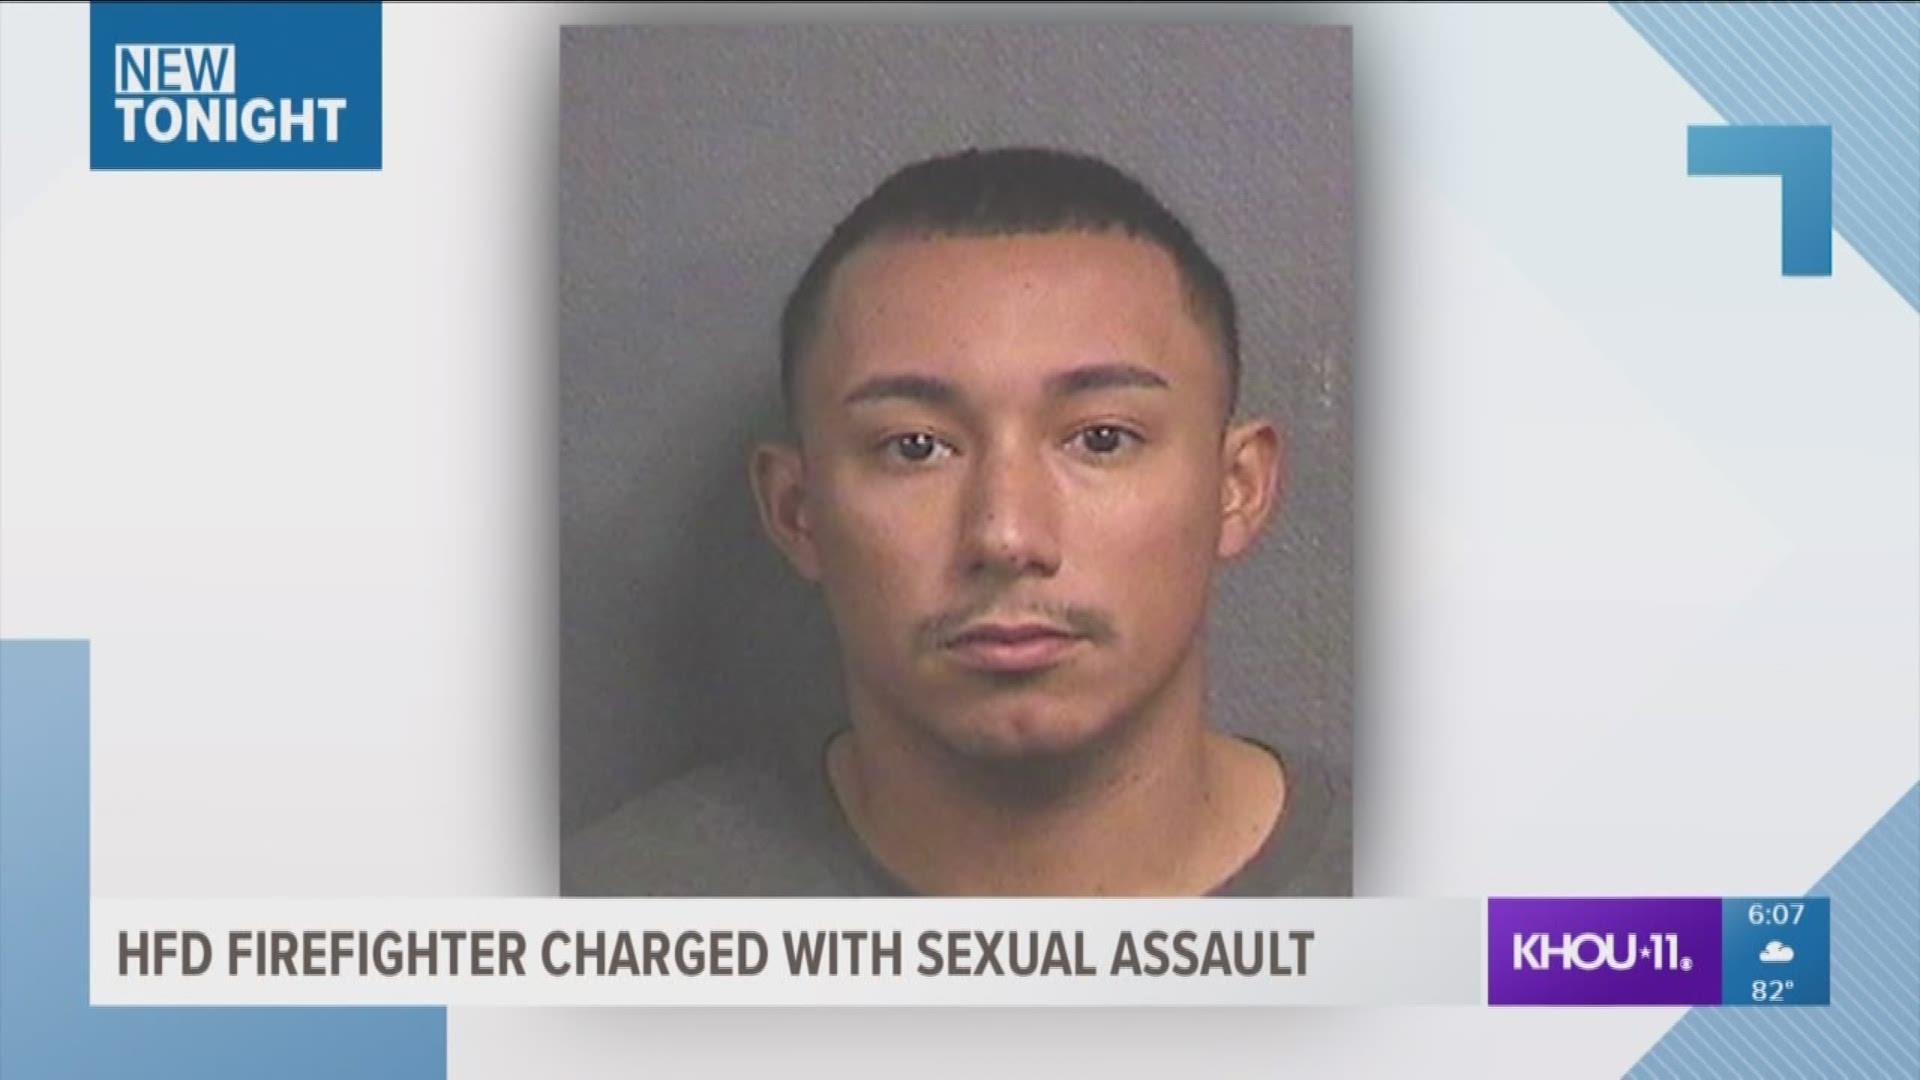 A Houston firefighter has been charged with sexual assault. Investigators say Henry Cuellar sexually assaulted a woman after going to an Humble bar.